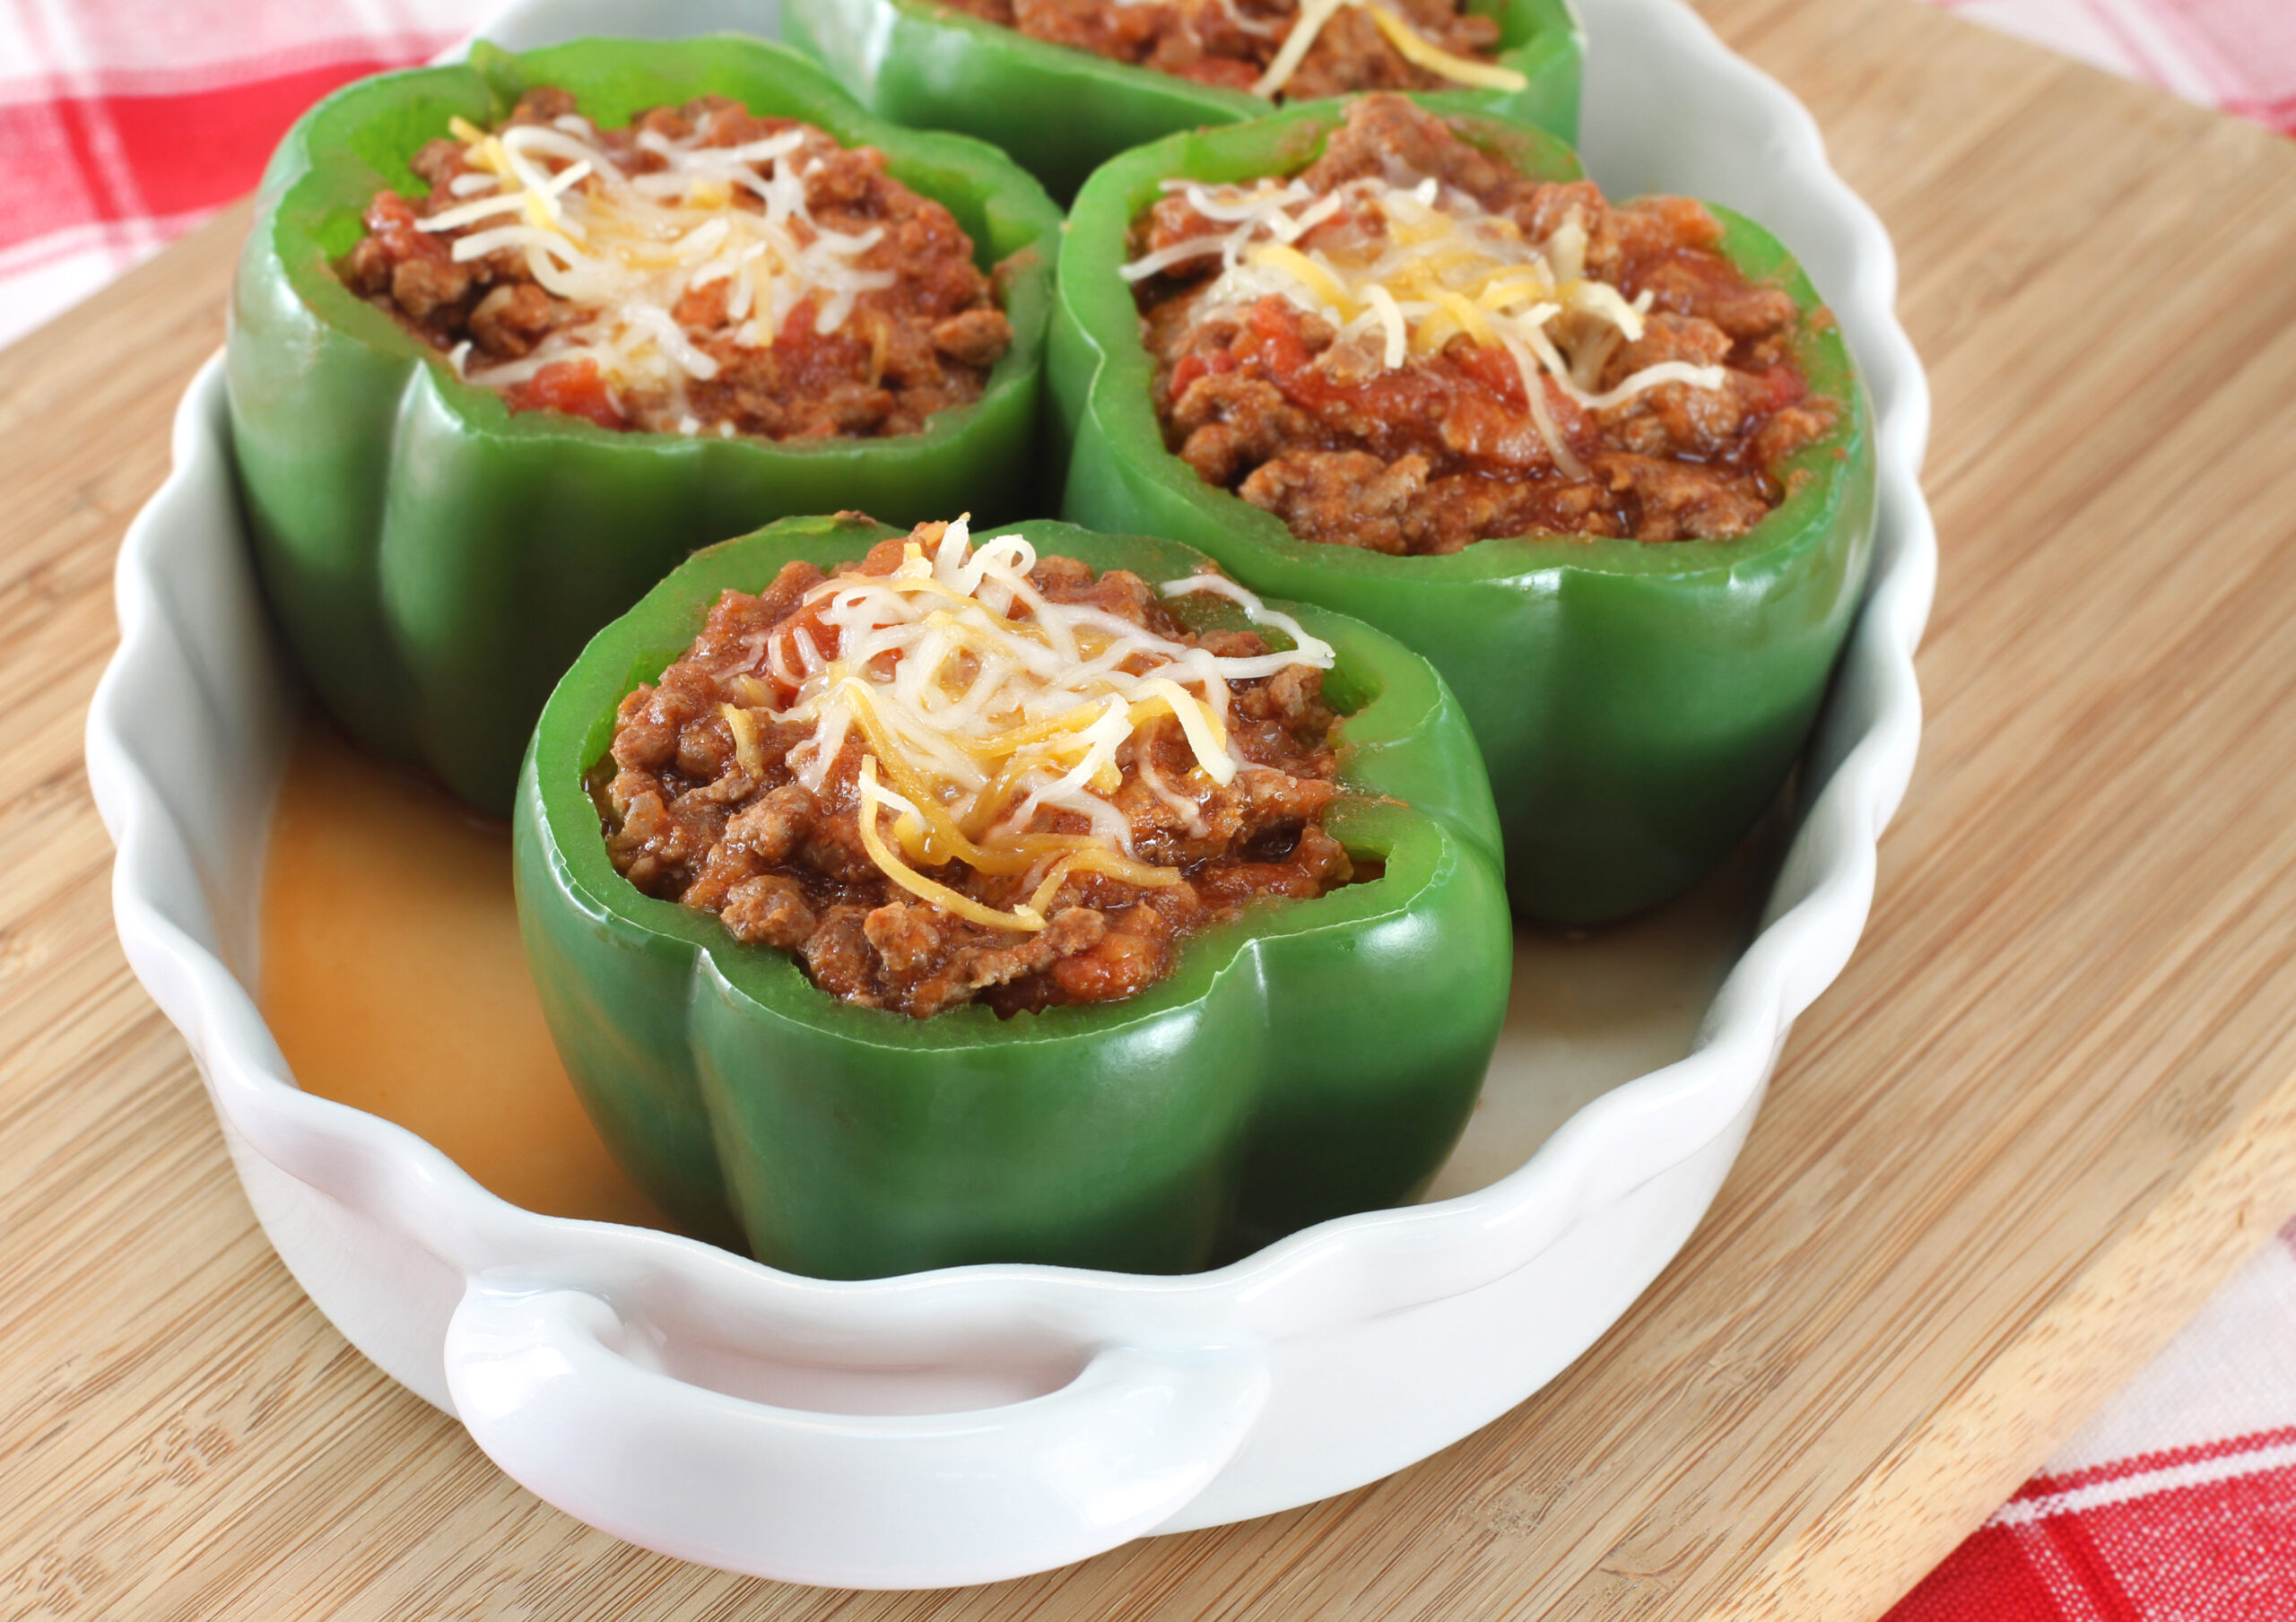 Oval baking dish of stuffed green peppers with selective focus on foremost pepper.